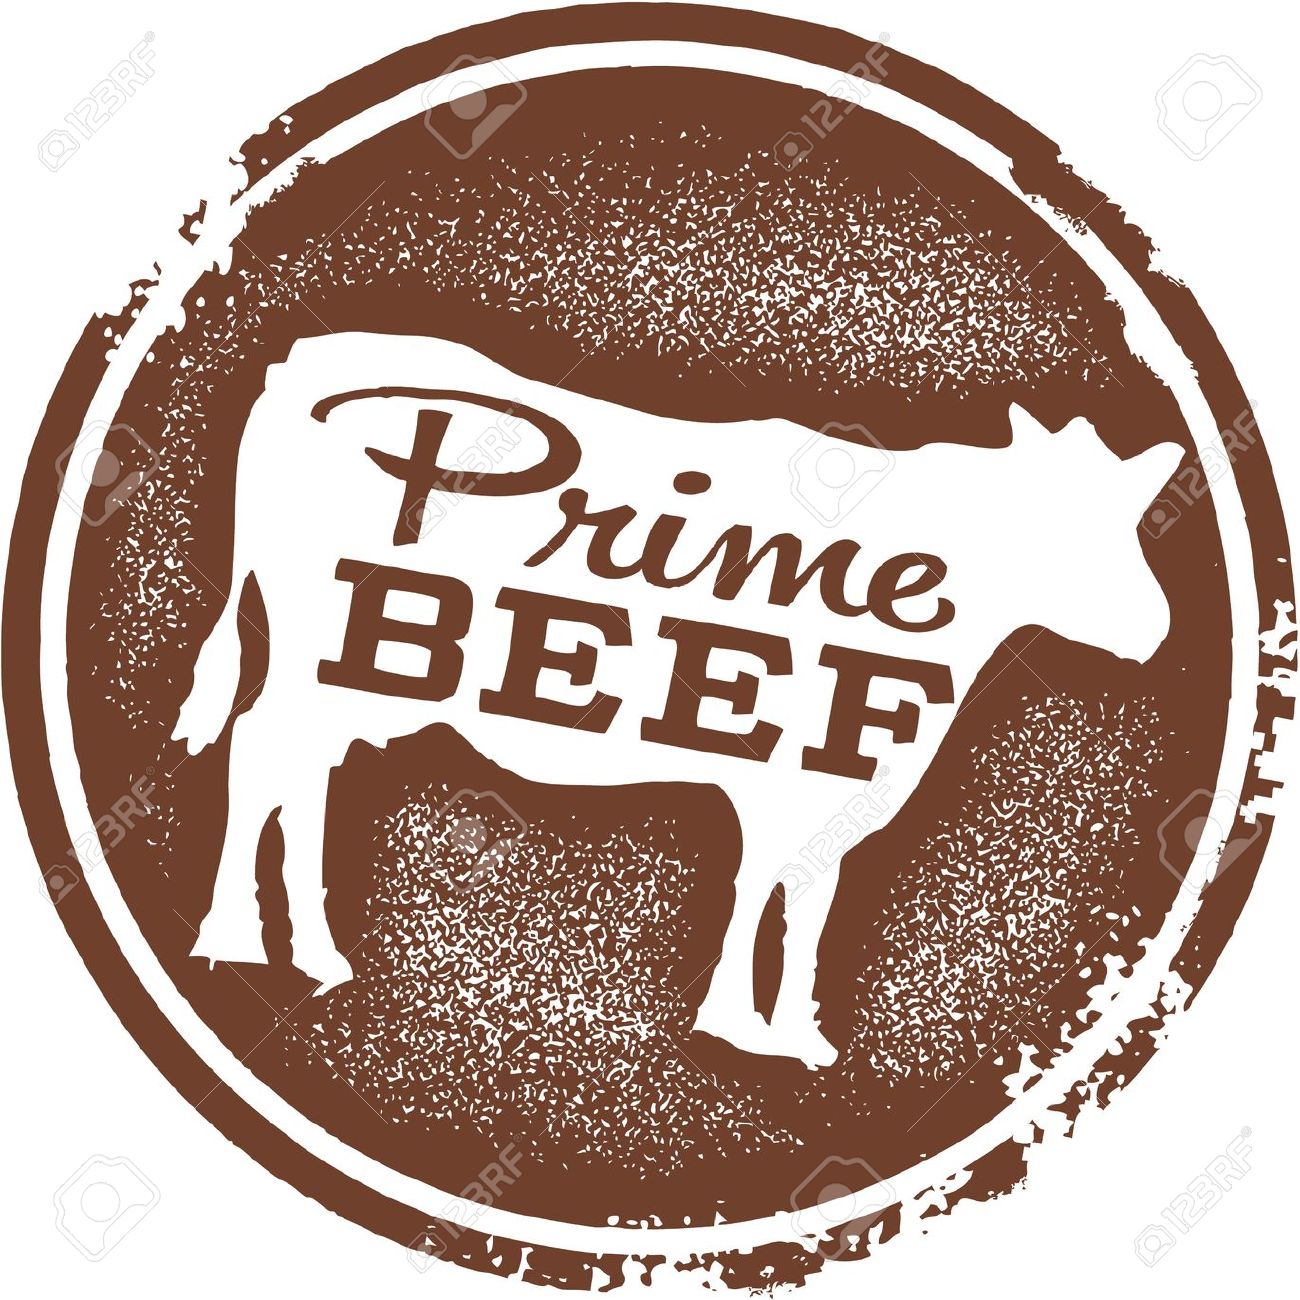 Prime Beef Stamp